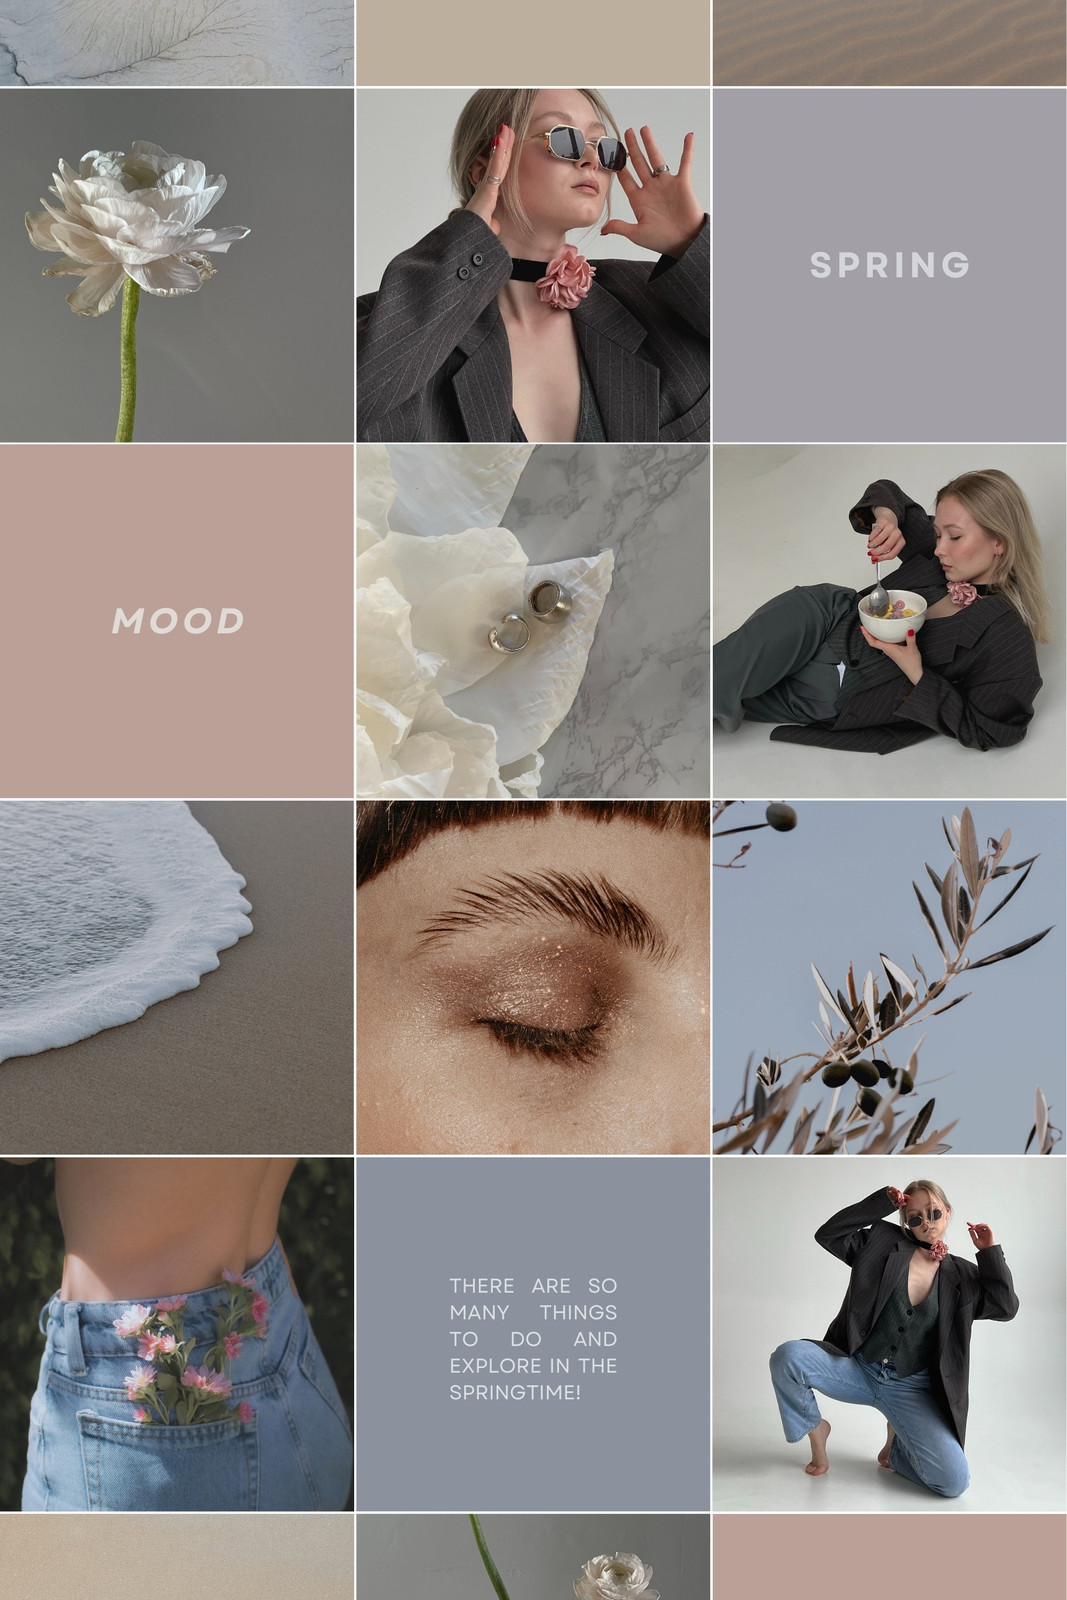 Page 10 - Free and customizable mood templates